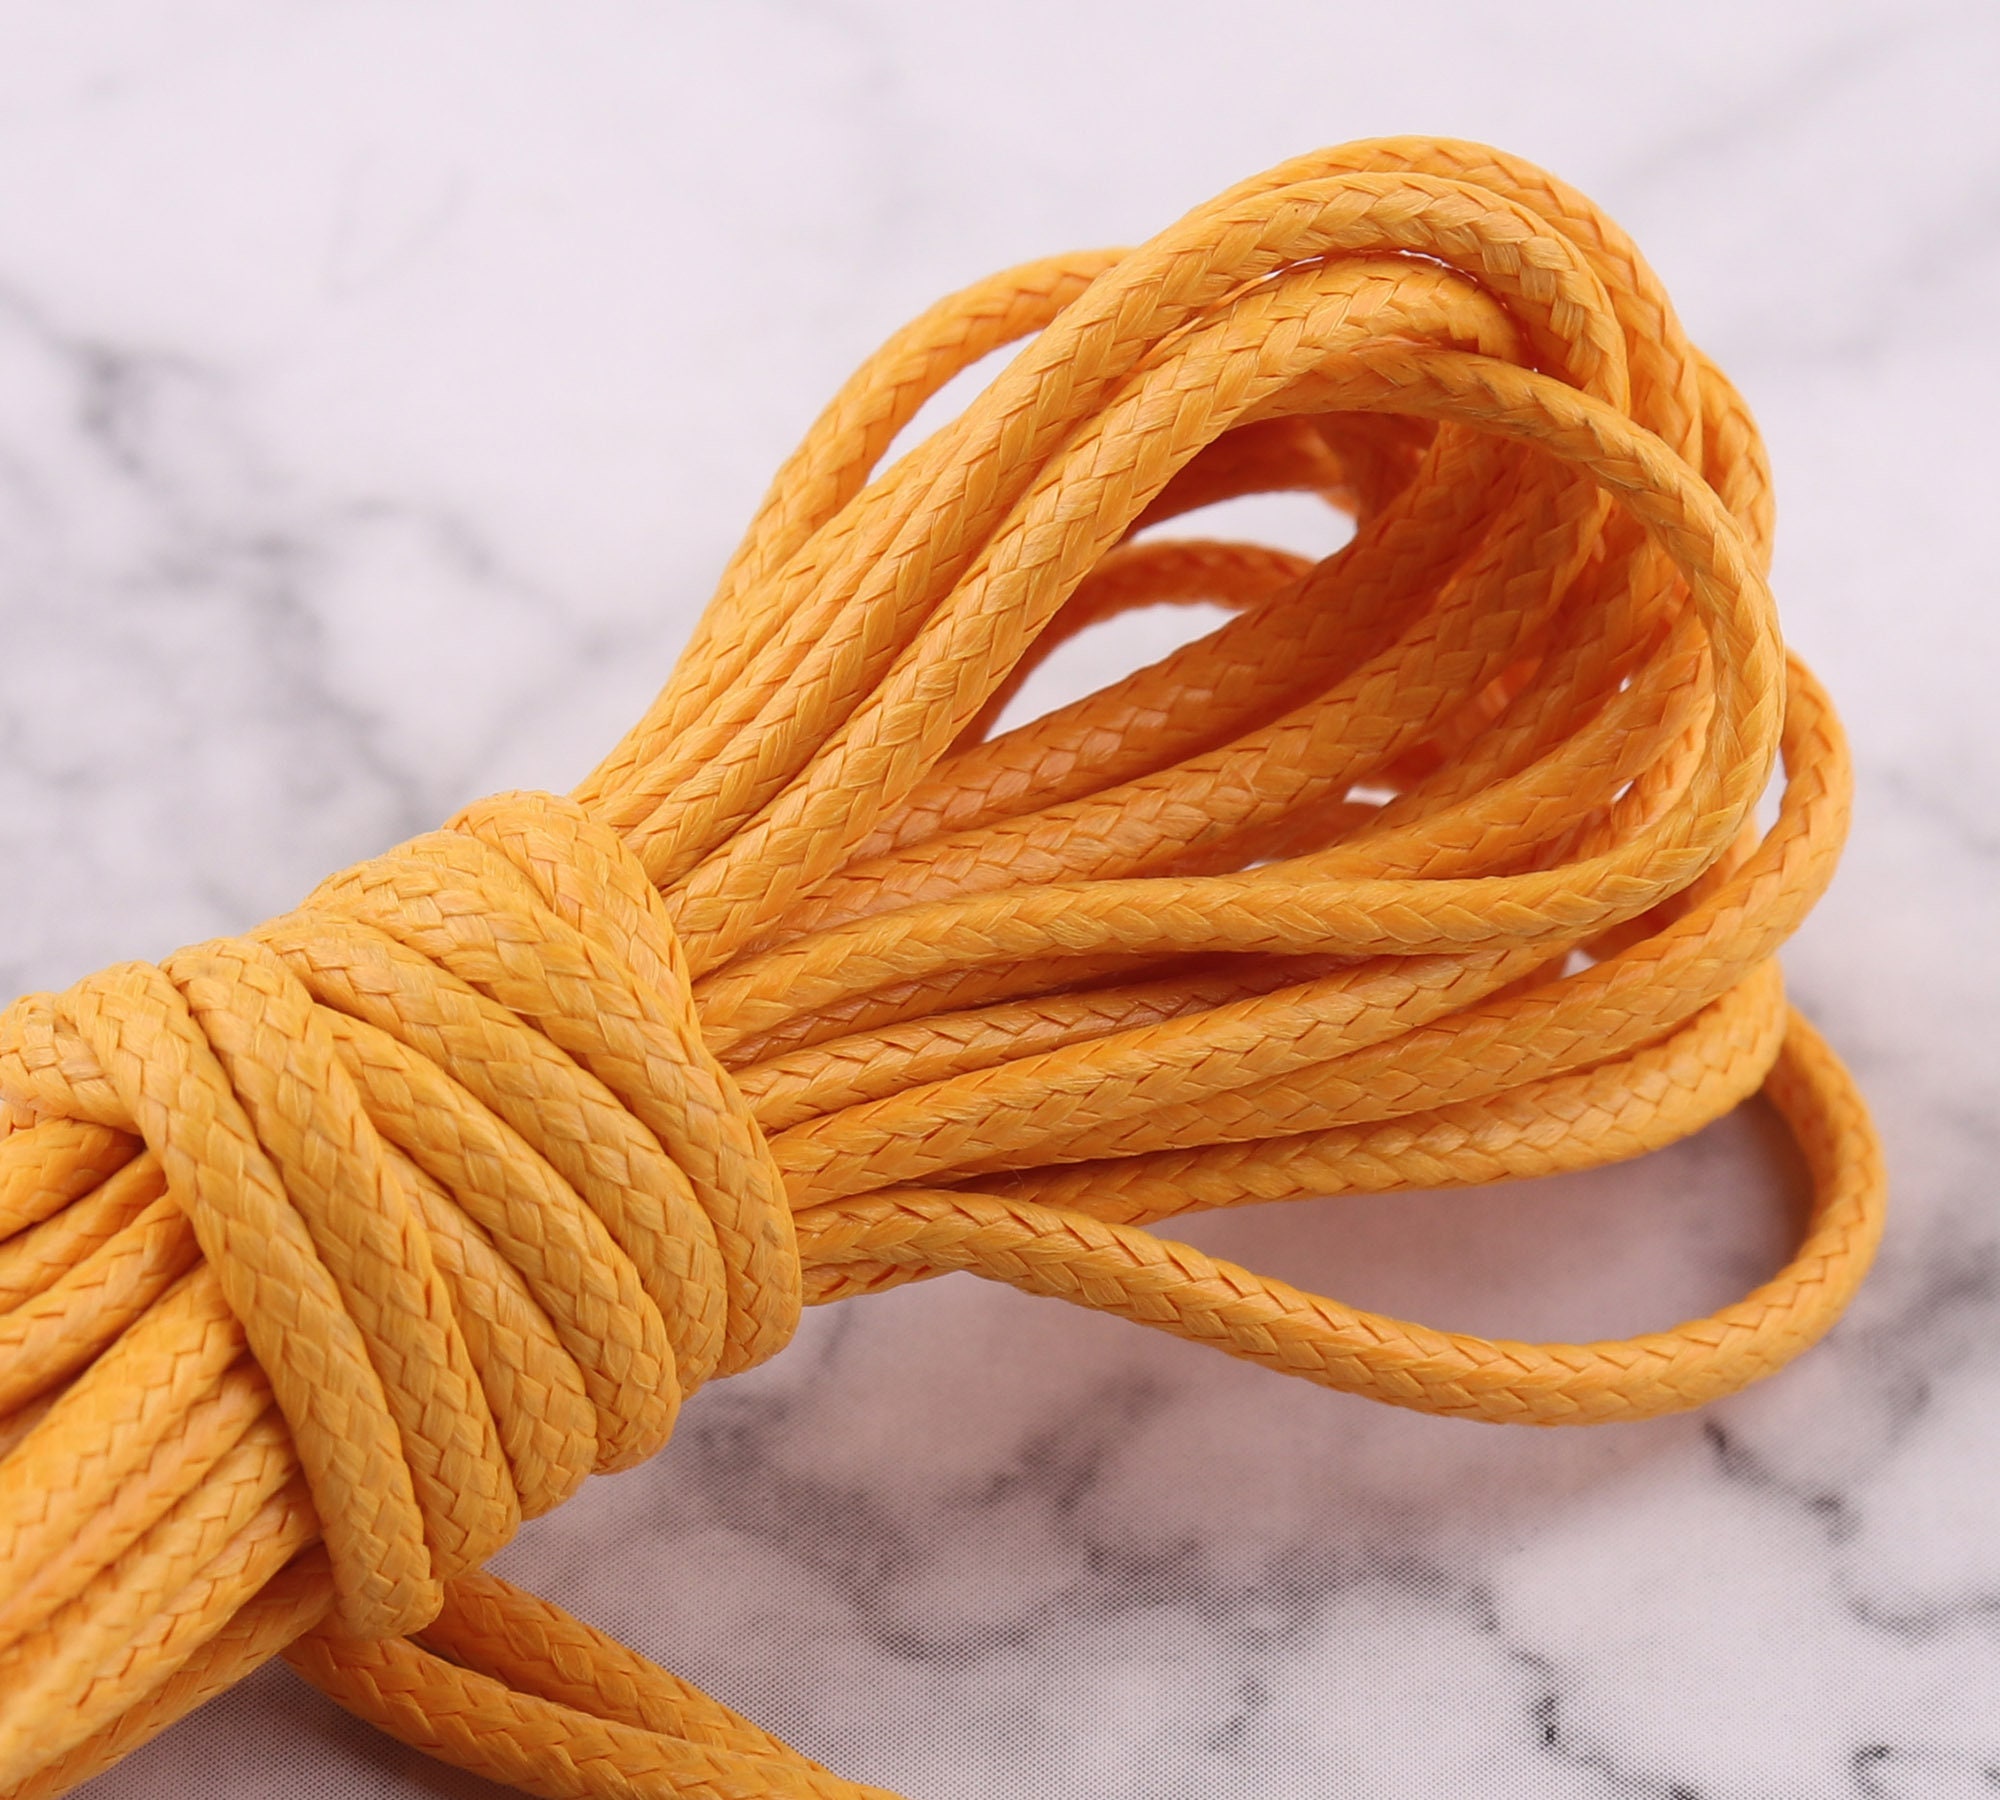 50 Yds Waxed Polyester Cord Korean Rope Top Quality Weaving Wire 1.5mm  Orange Cord for Tassel/weaving/necklace/bracelet/teething/glasses/diy -   Canada